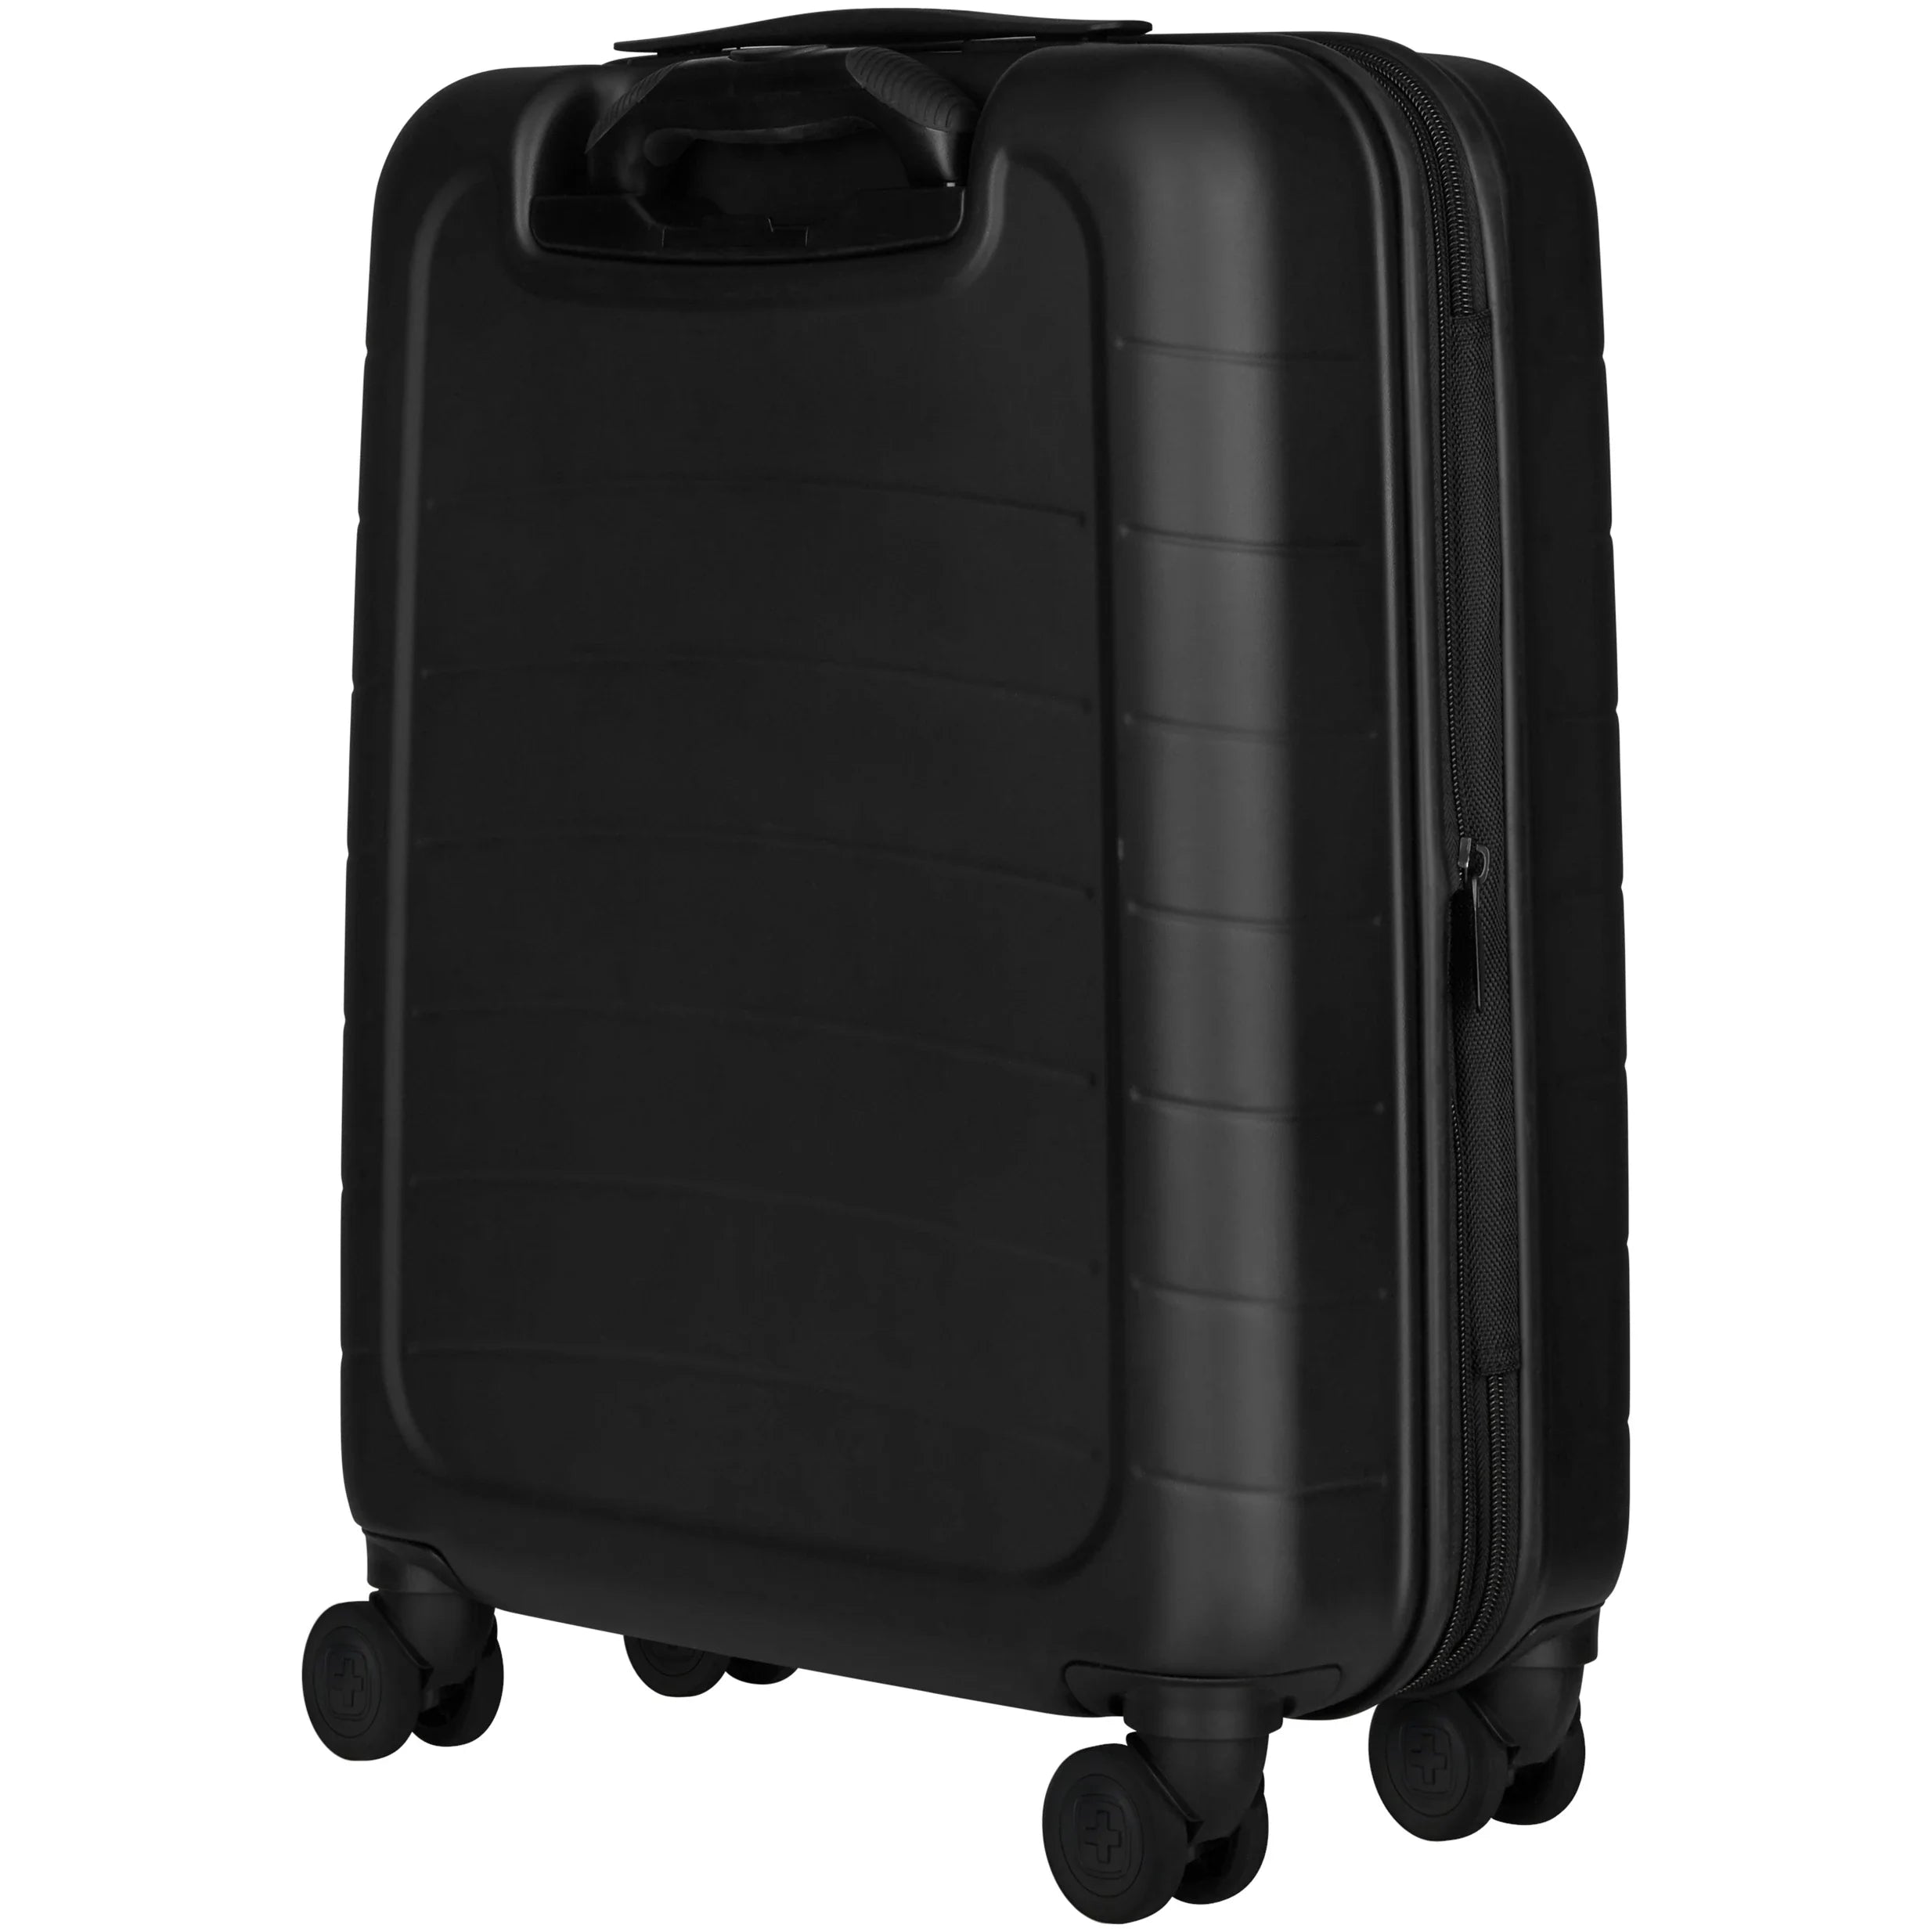 Wenger Luggage Syntry Carry-On Case 55 cm - Black/Heather Grey